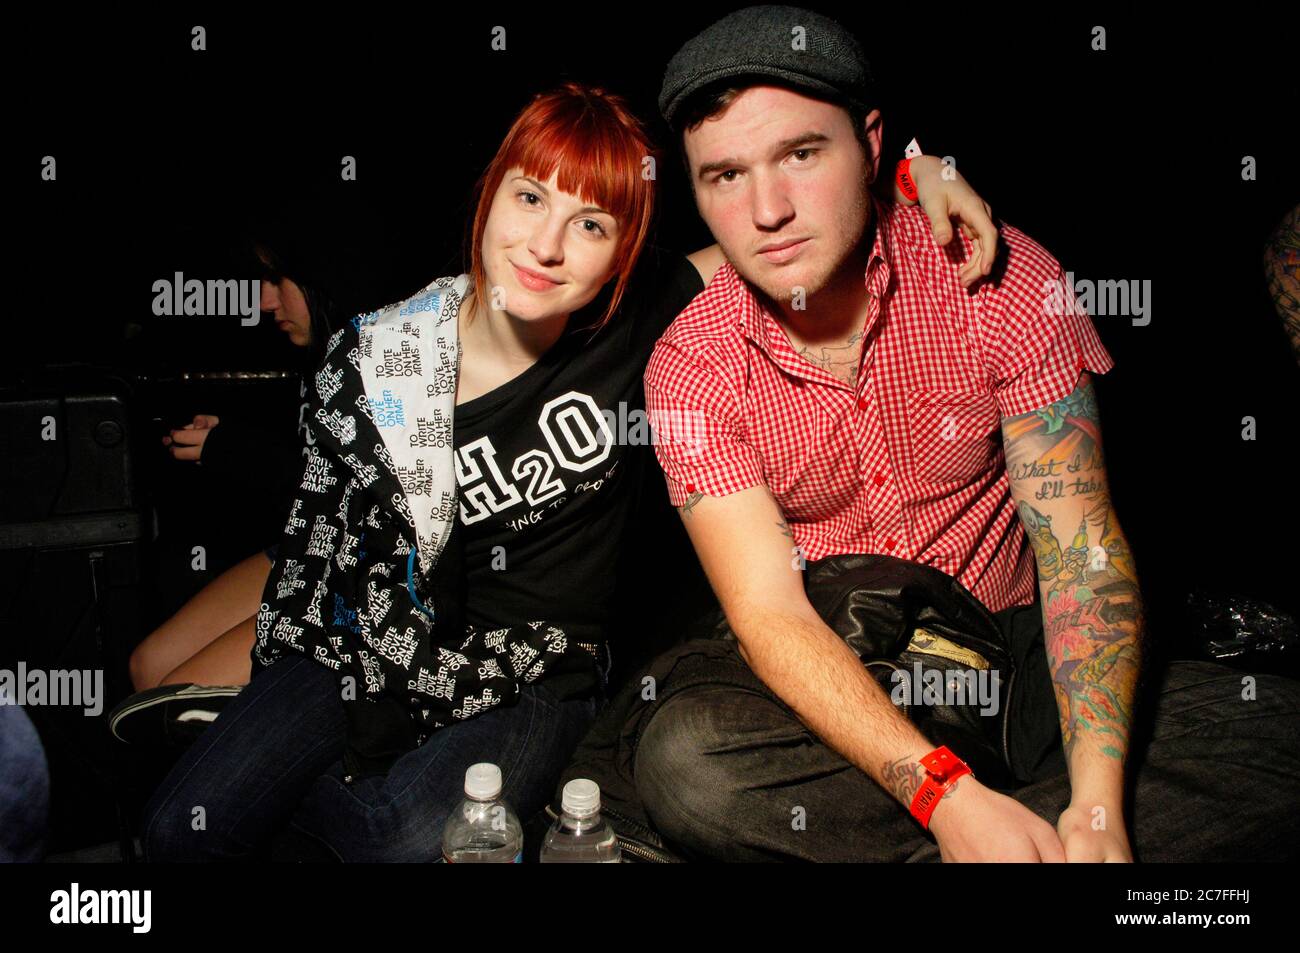 l r hayley williams of paramore and chad gilbert of new found glory backstage at the bamboozle left at the verizon wireless amphitheater in irvine credit jared milgrimthe photo access 2C7FFHJ